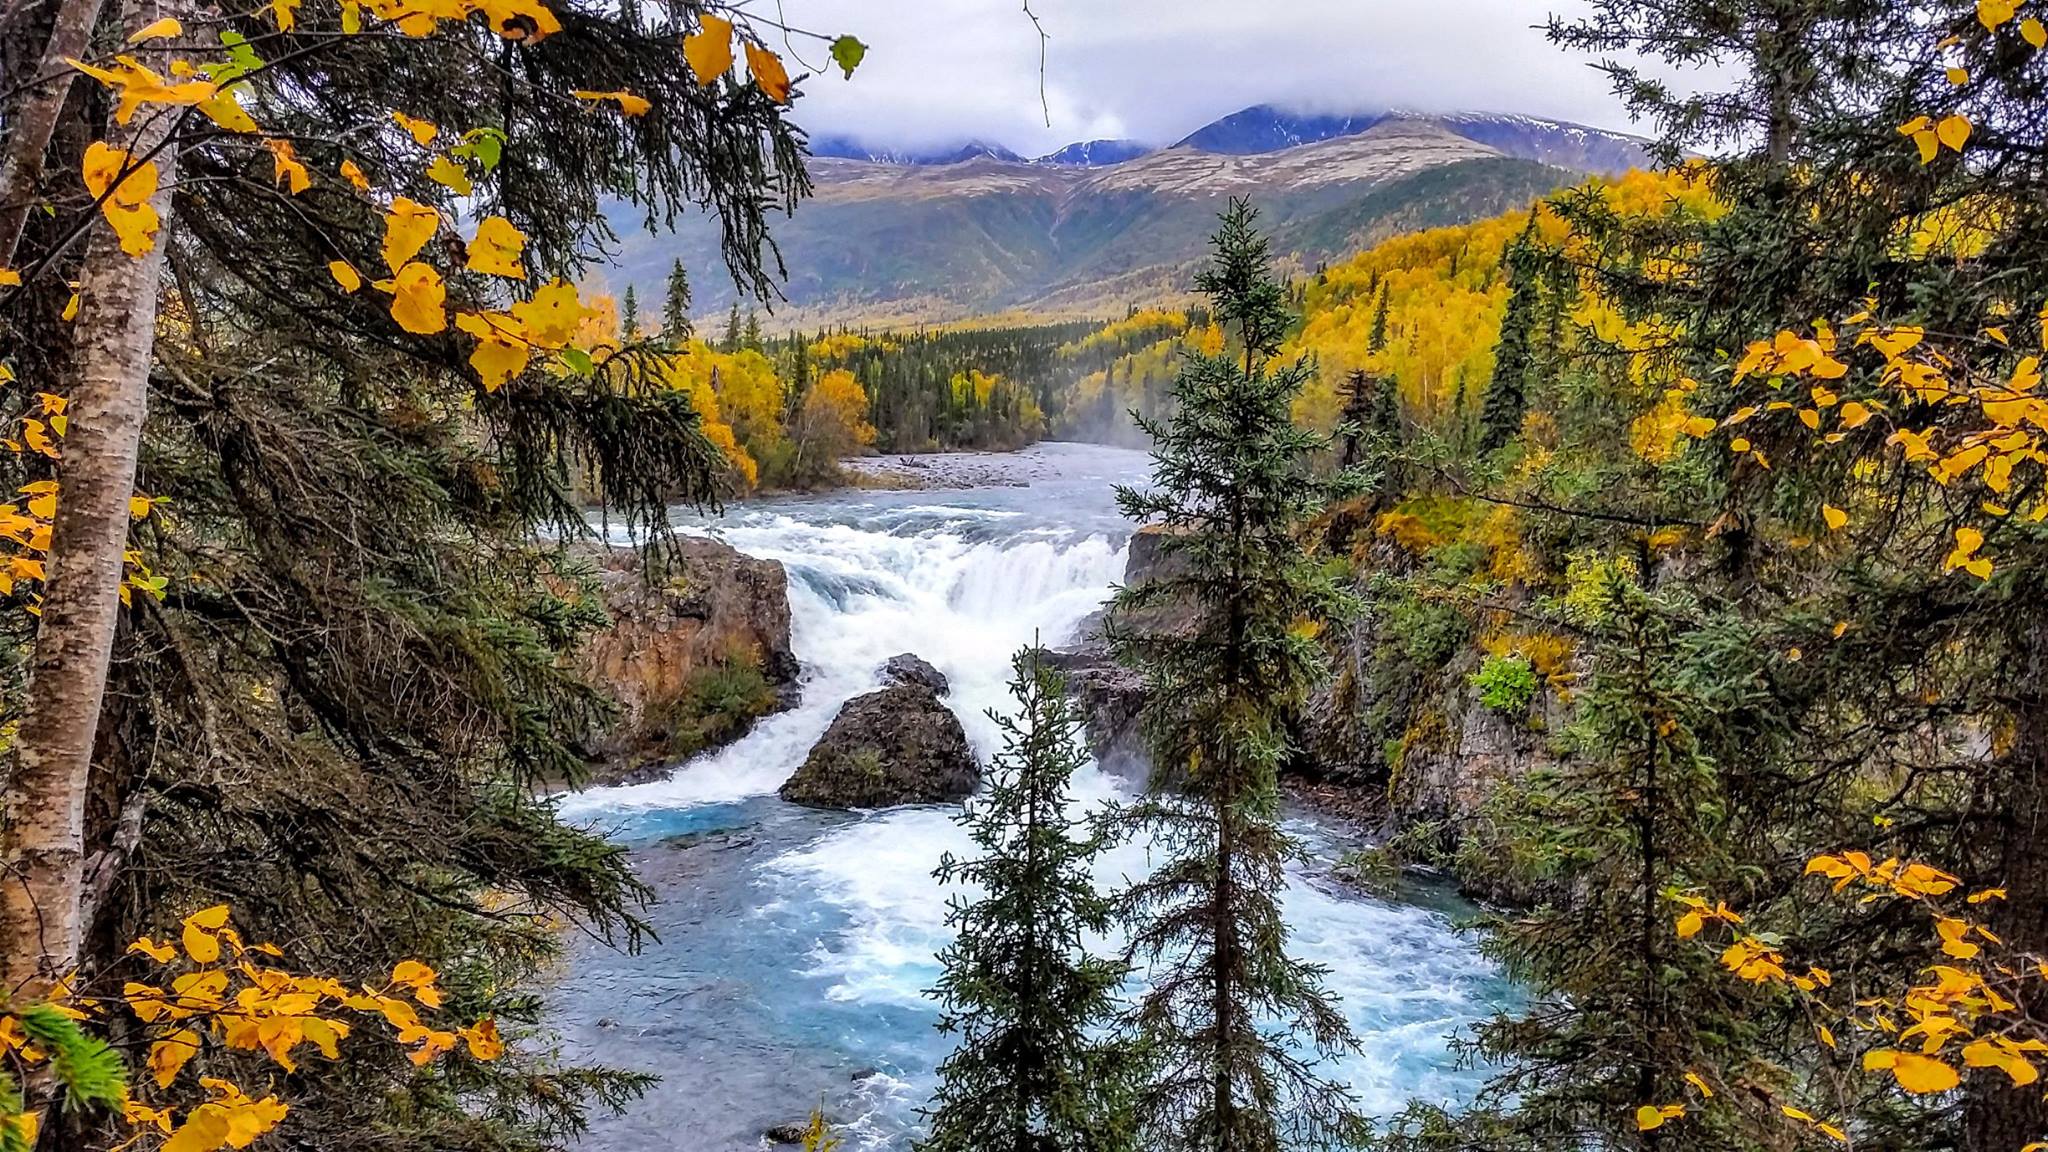 Waterfall surrounded by forest in fall foiliage and mountains in the background.